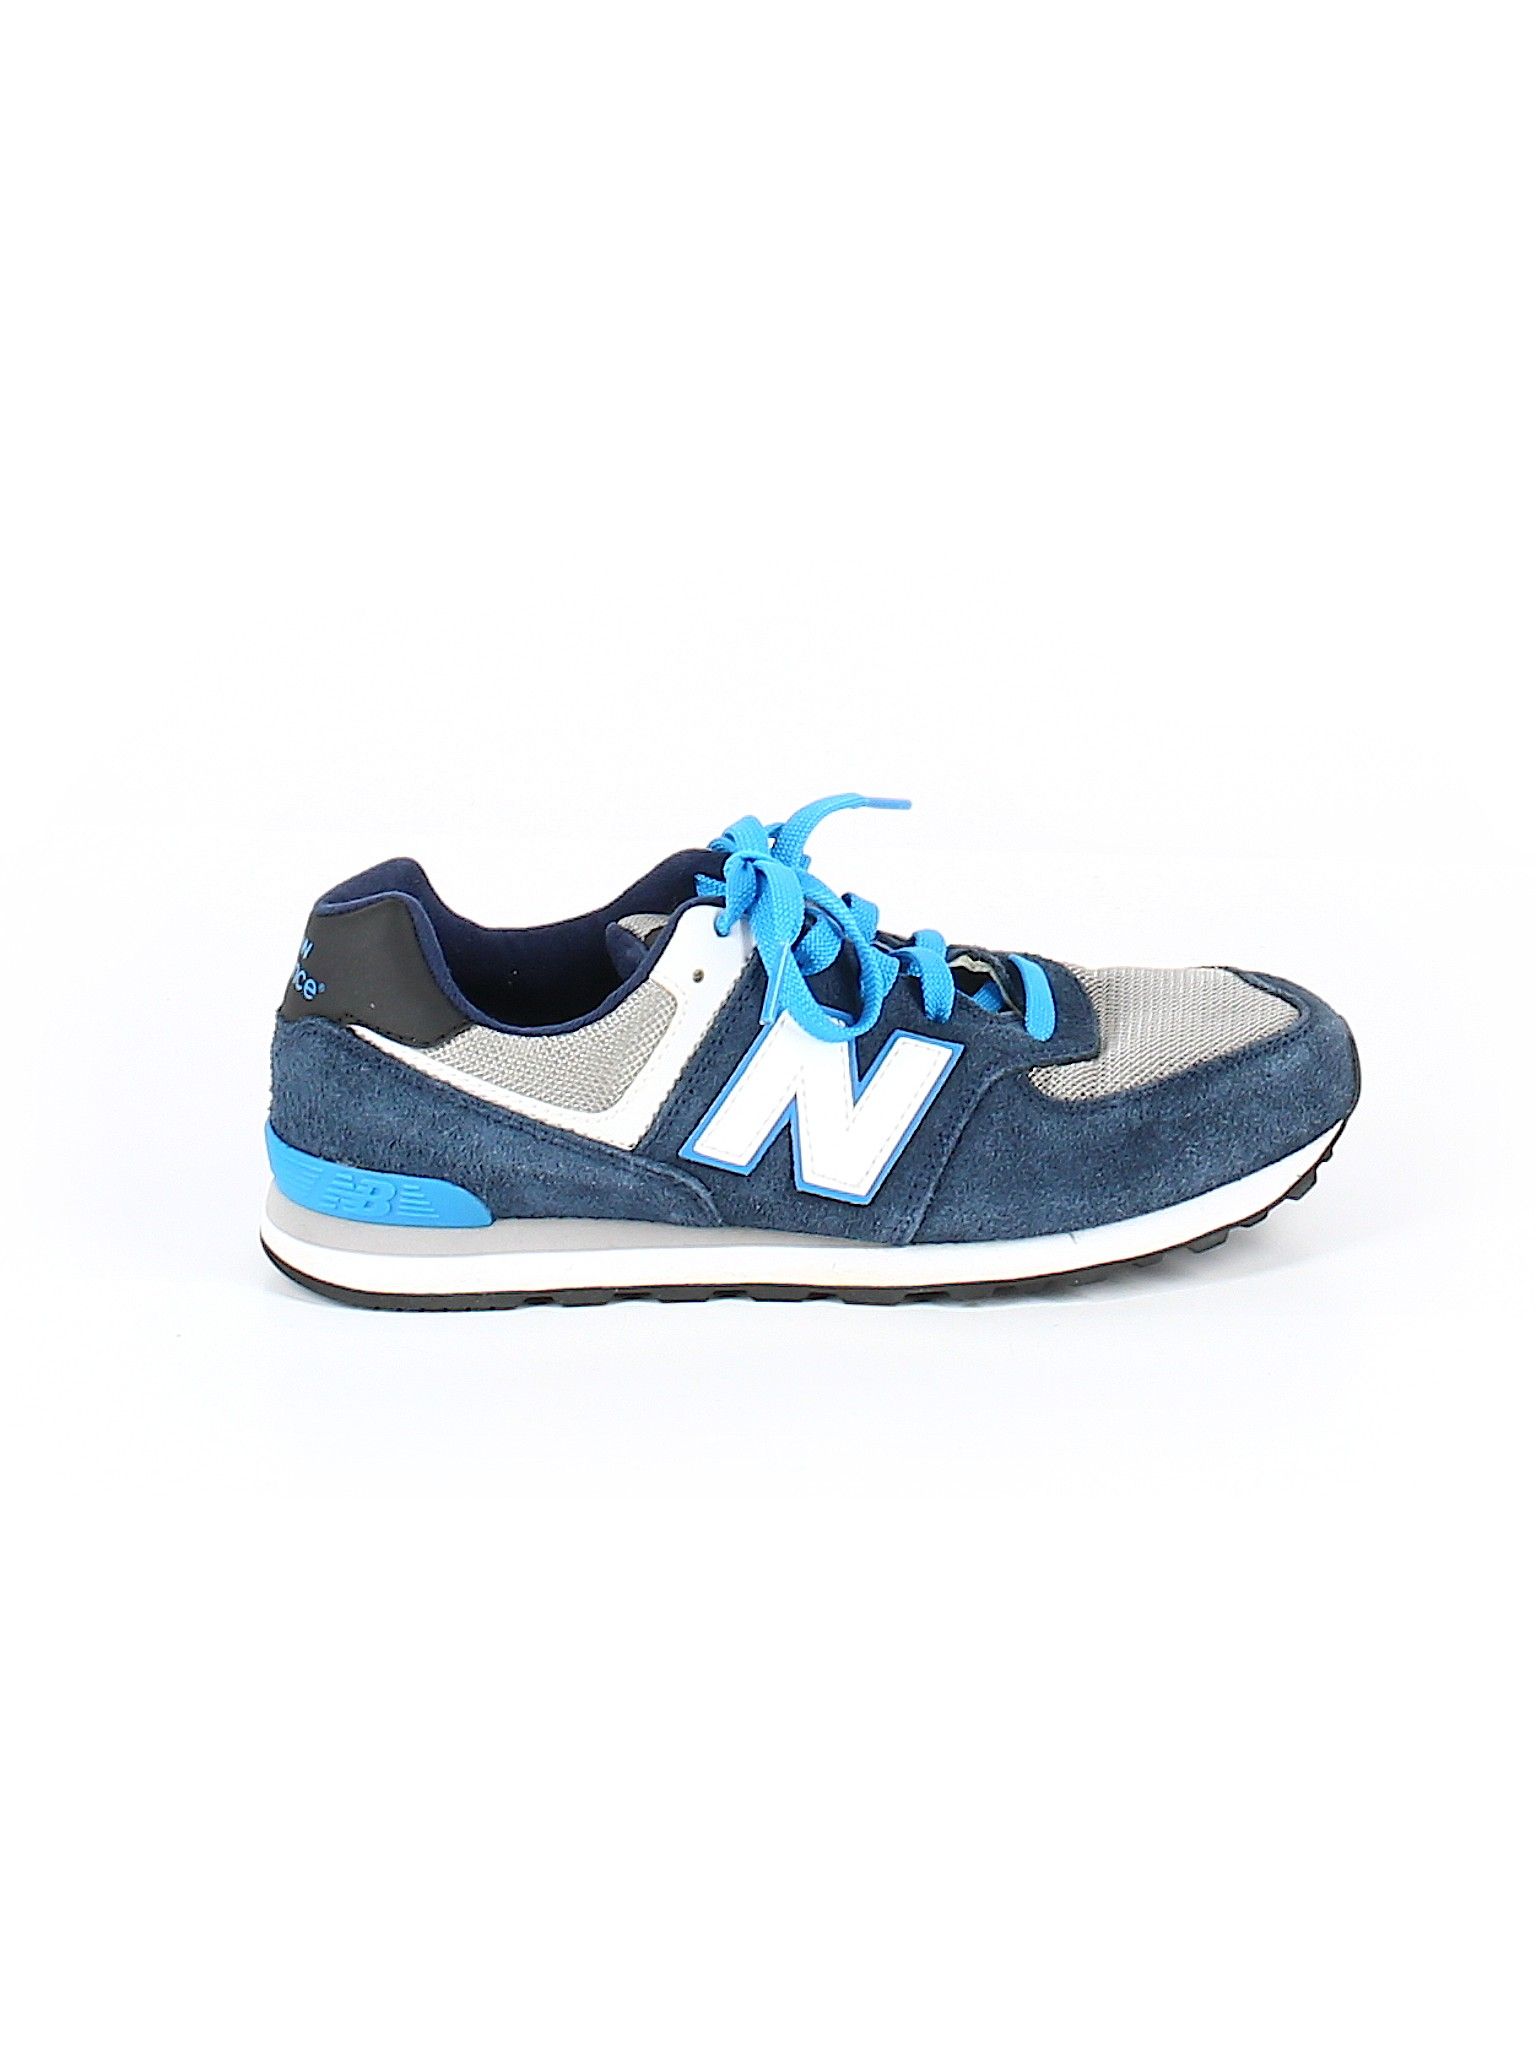 New Balance Sneakers Size 5 1/2: Blue Boys Shoes - 55924418 | thredUP